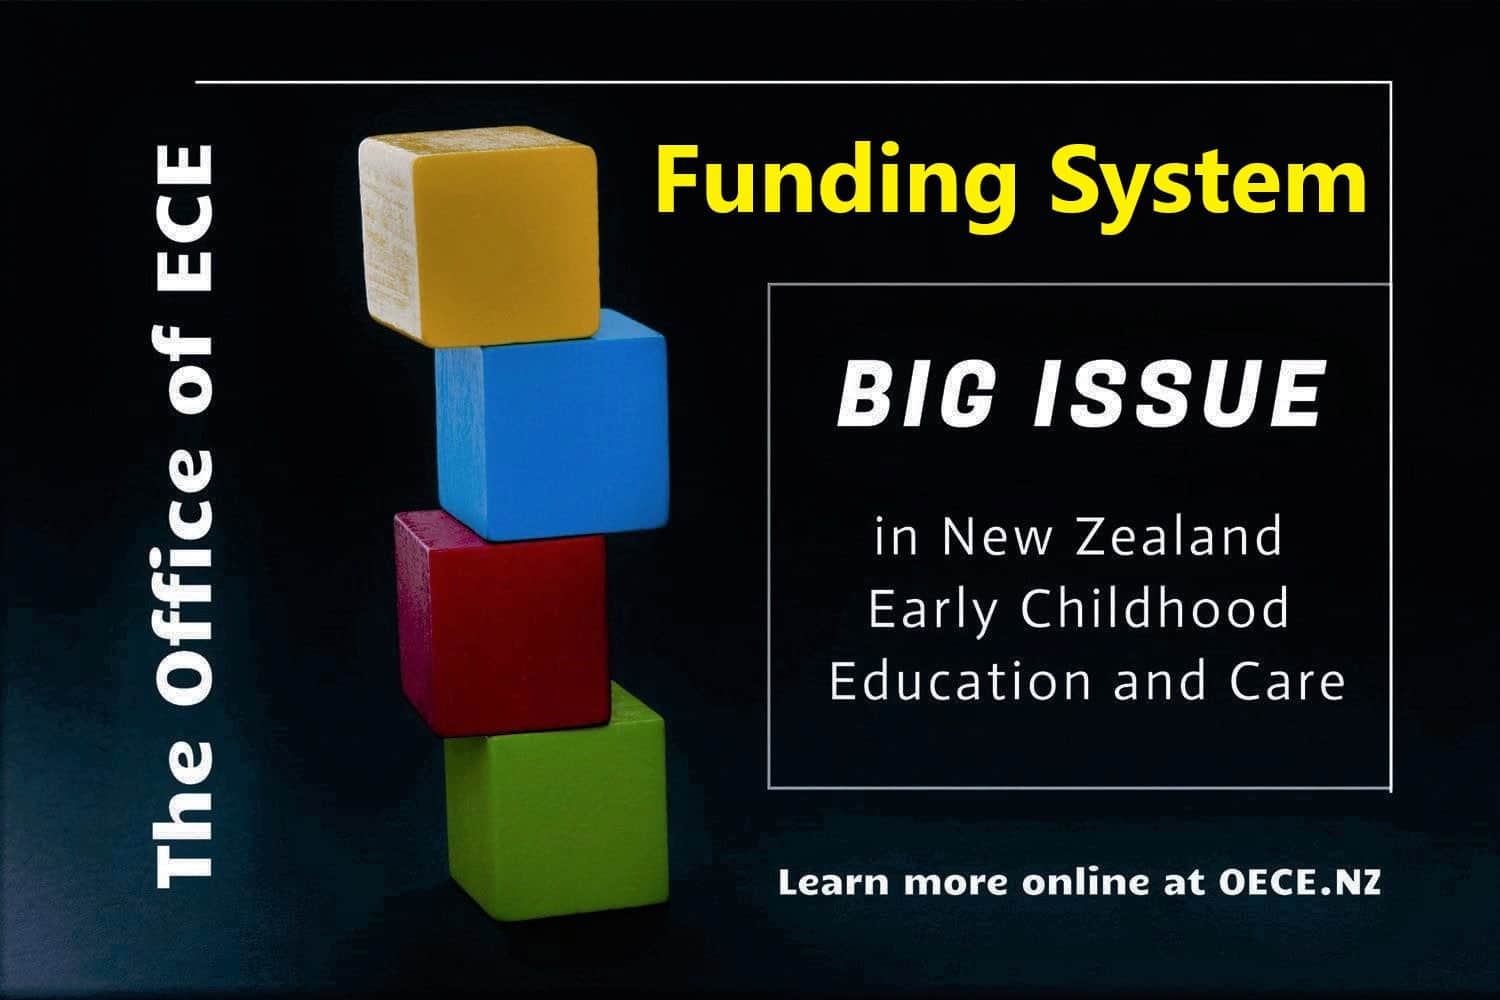 NZ Early Childhood Education Funding System